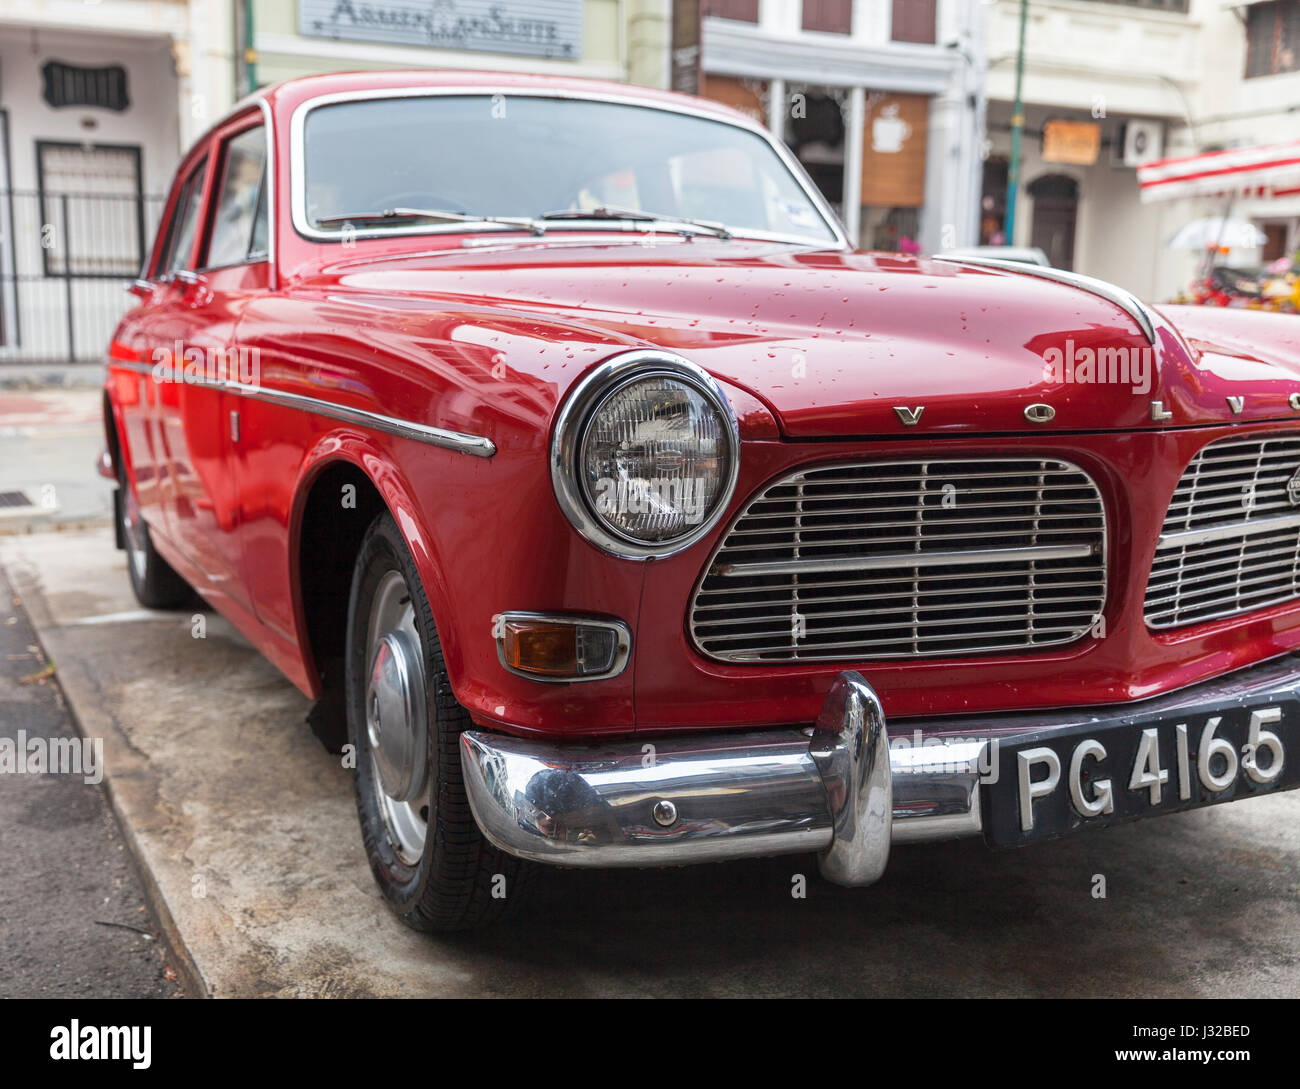 GEORGE TOWN, MALAYSIA - MARCH 22: Volvo Amazon parked on the street of George Town on March 22, 2016 in George Town, Malaysia. Stock Photo